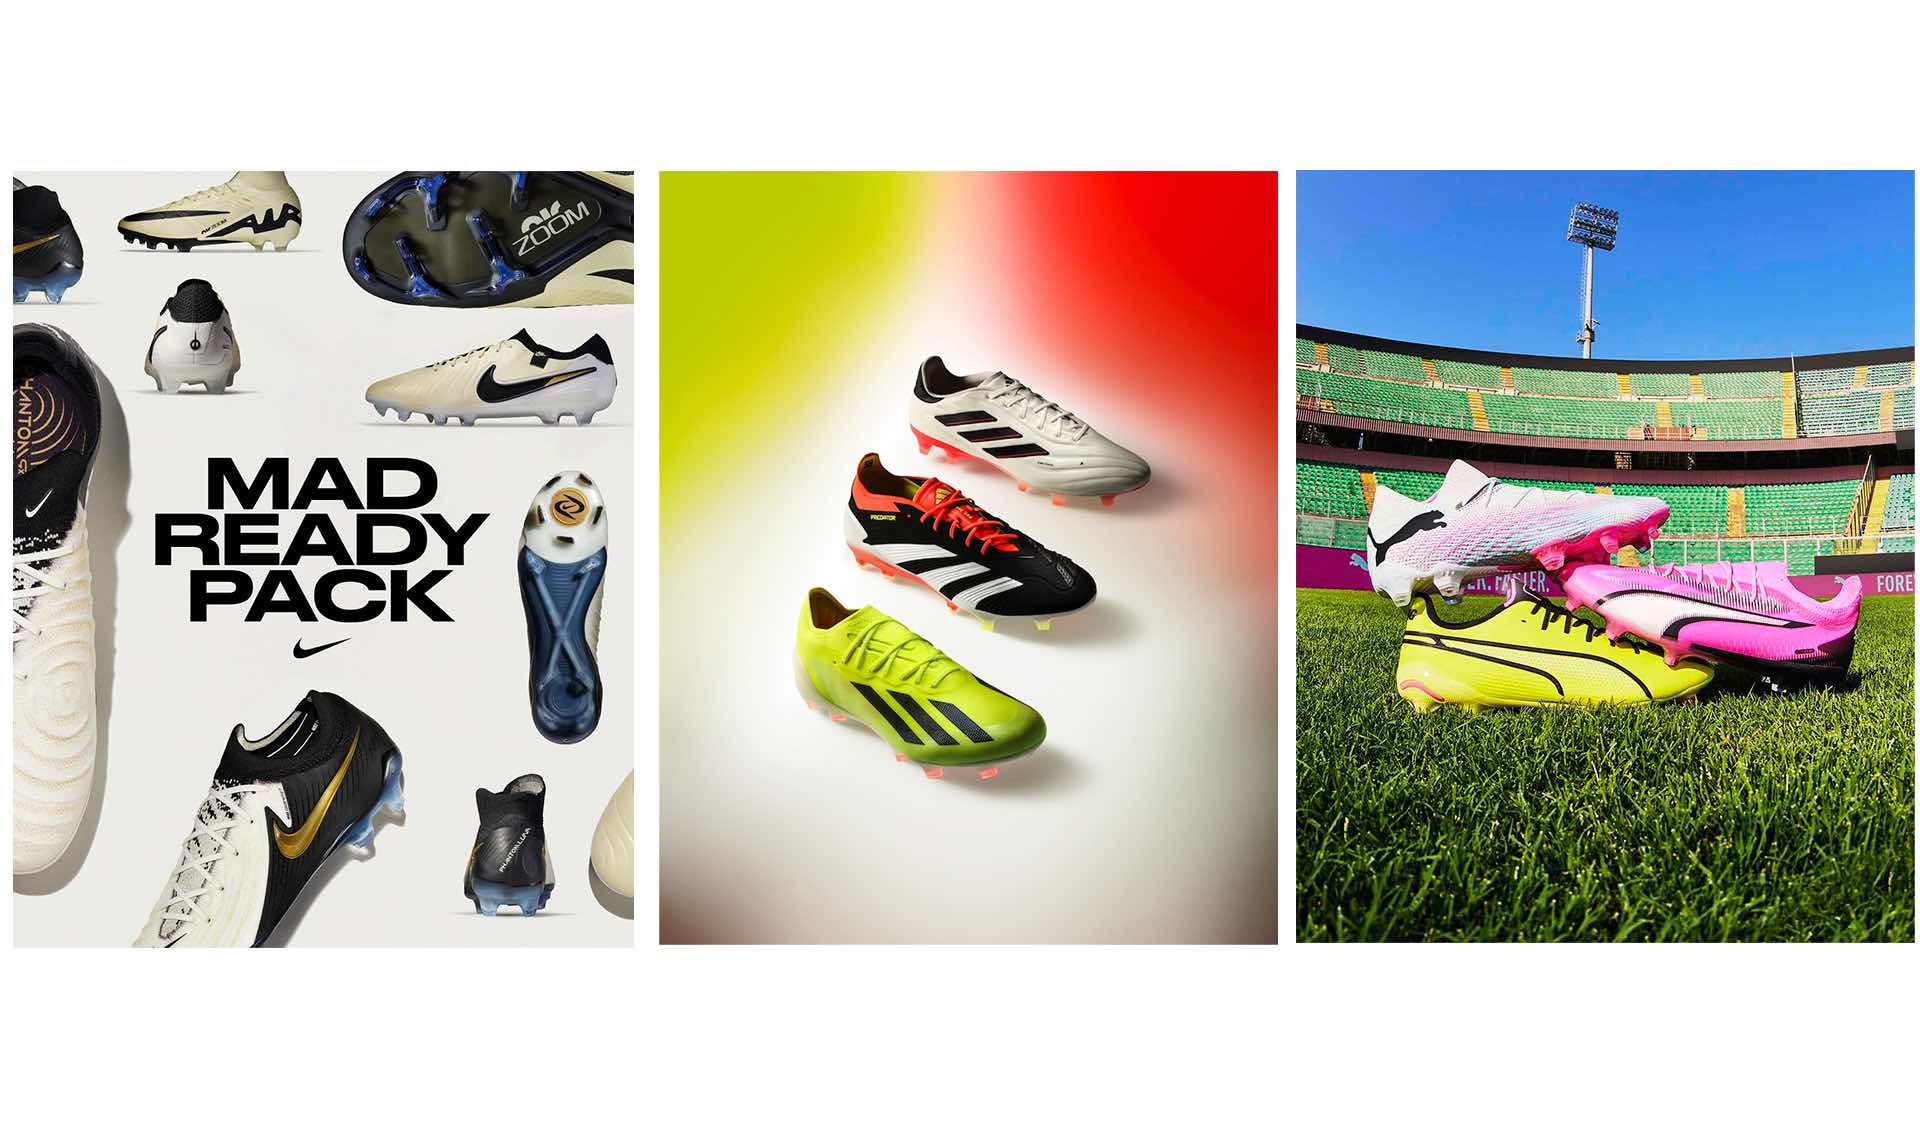 Revolutionizing the Game: Adidas Solar Energy Pack, Nike Mad Ready Pack, and Puma Phenomenal Pack Soccer Cleats - Available at PREMIUM SOCCER